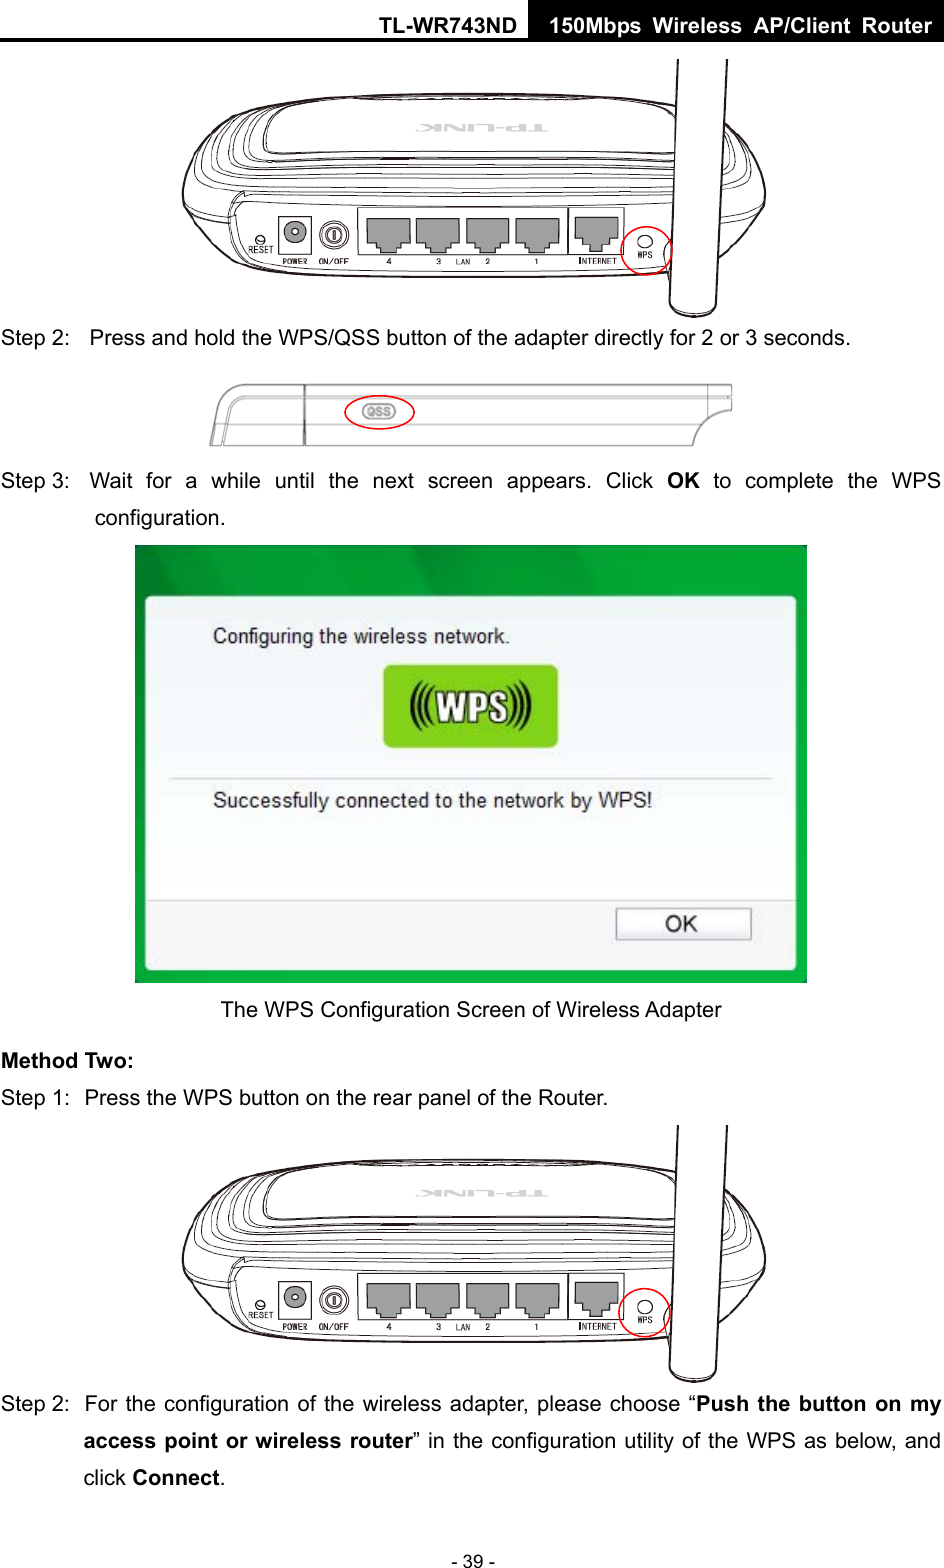 TL-WR743ND 150Mbps Wireless AP/Client Router - 39 -  Step 2:  Press and hold the WPS/QSS button of the adapter directly for 2 or 3 seconds.  Step 3:  Wait for a while until the next screen appears. Click OK to complete the WPS configuration.  The WPS Configuration Screen of Wireless Adapter   Method Two: Step 1:  Press the WPS button on the rear panel of the Router.  Step 2:  For the configuration of the wireless adapter, please choose “Push the button on my access point or wireless router” in the configuration utility of the WPS as below, and click Connect.  